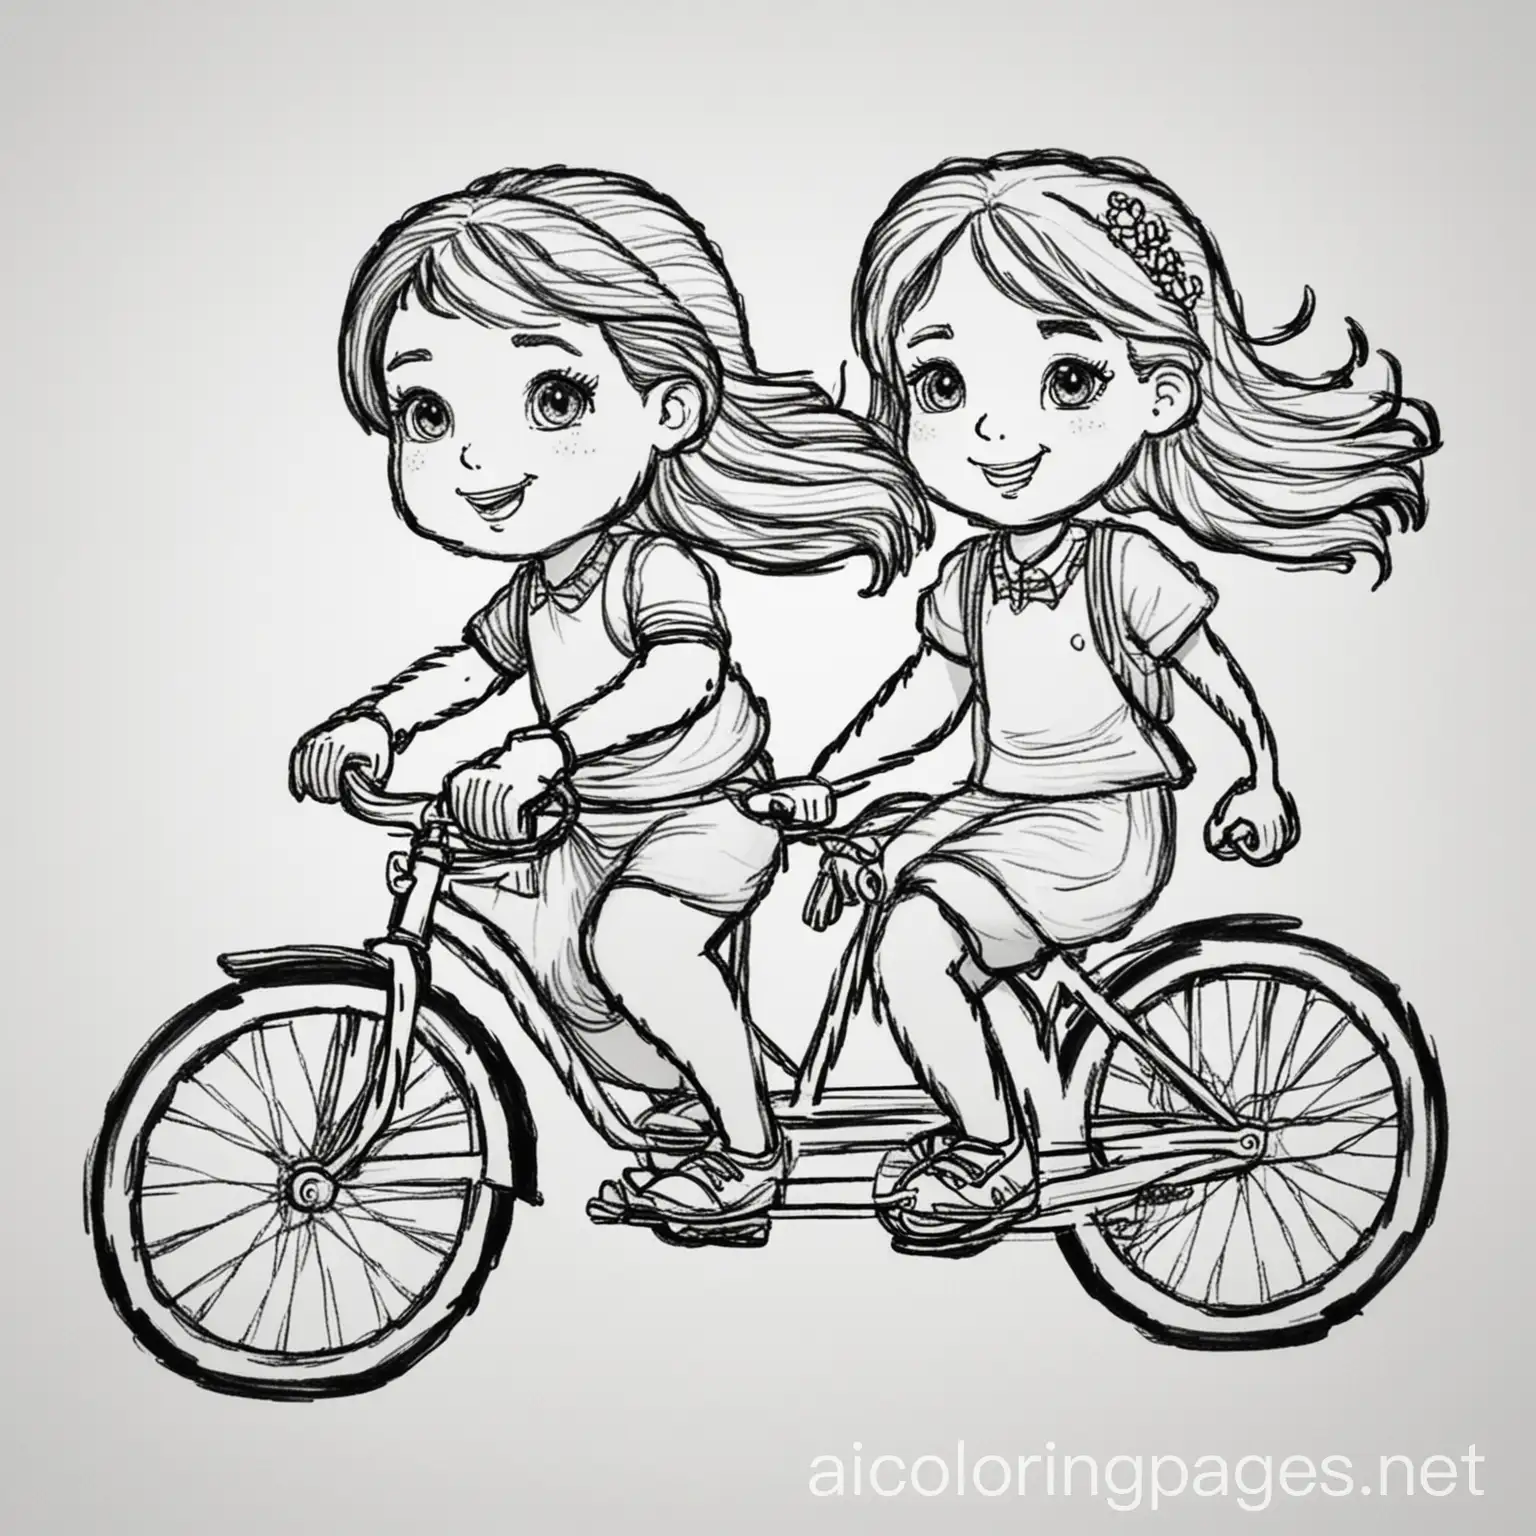 two girl bicycle, Coloring Page, black and white, line art, white background, Simplicity, Ample White Space. The background of the coloring page is plain white to make it easy for young children to color within the lines. The outlines of all the subjects are easy to distinguish, making it simple for kids to color without too much difficulty